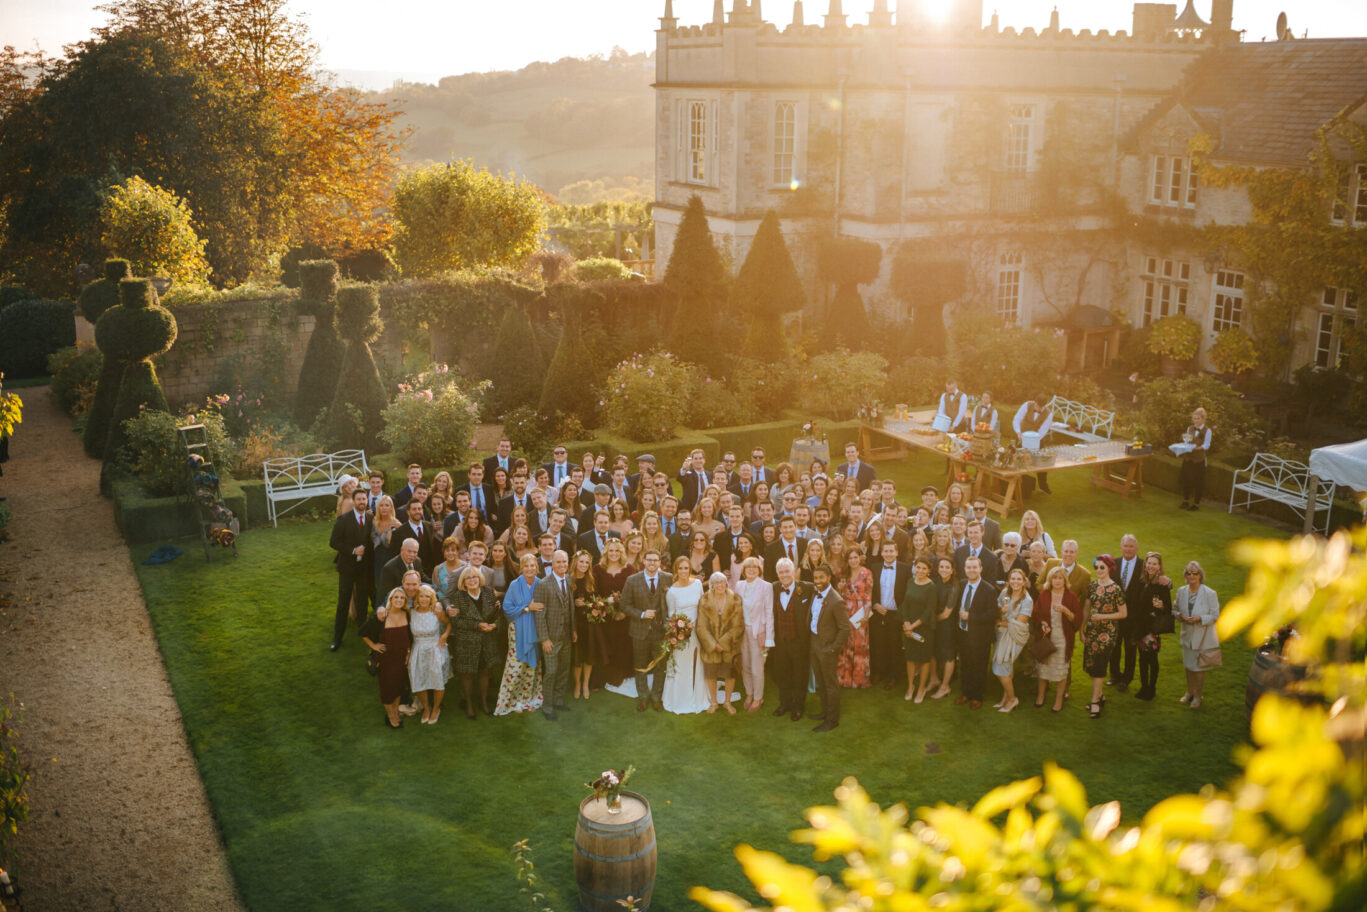 Guests on the croquet lawn at Euridge Manor Wedding Venue with 5 star catering services